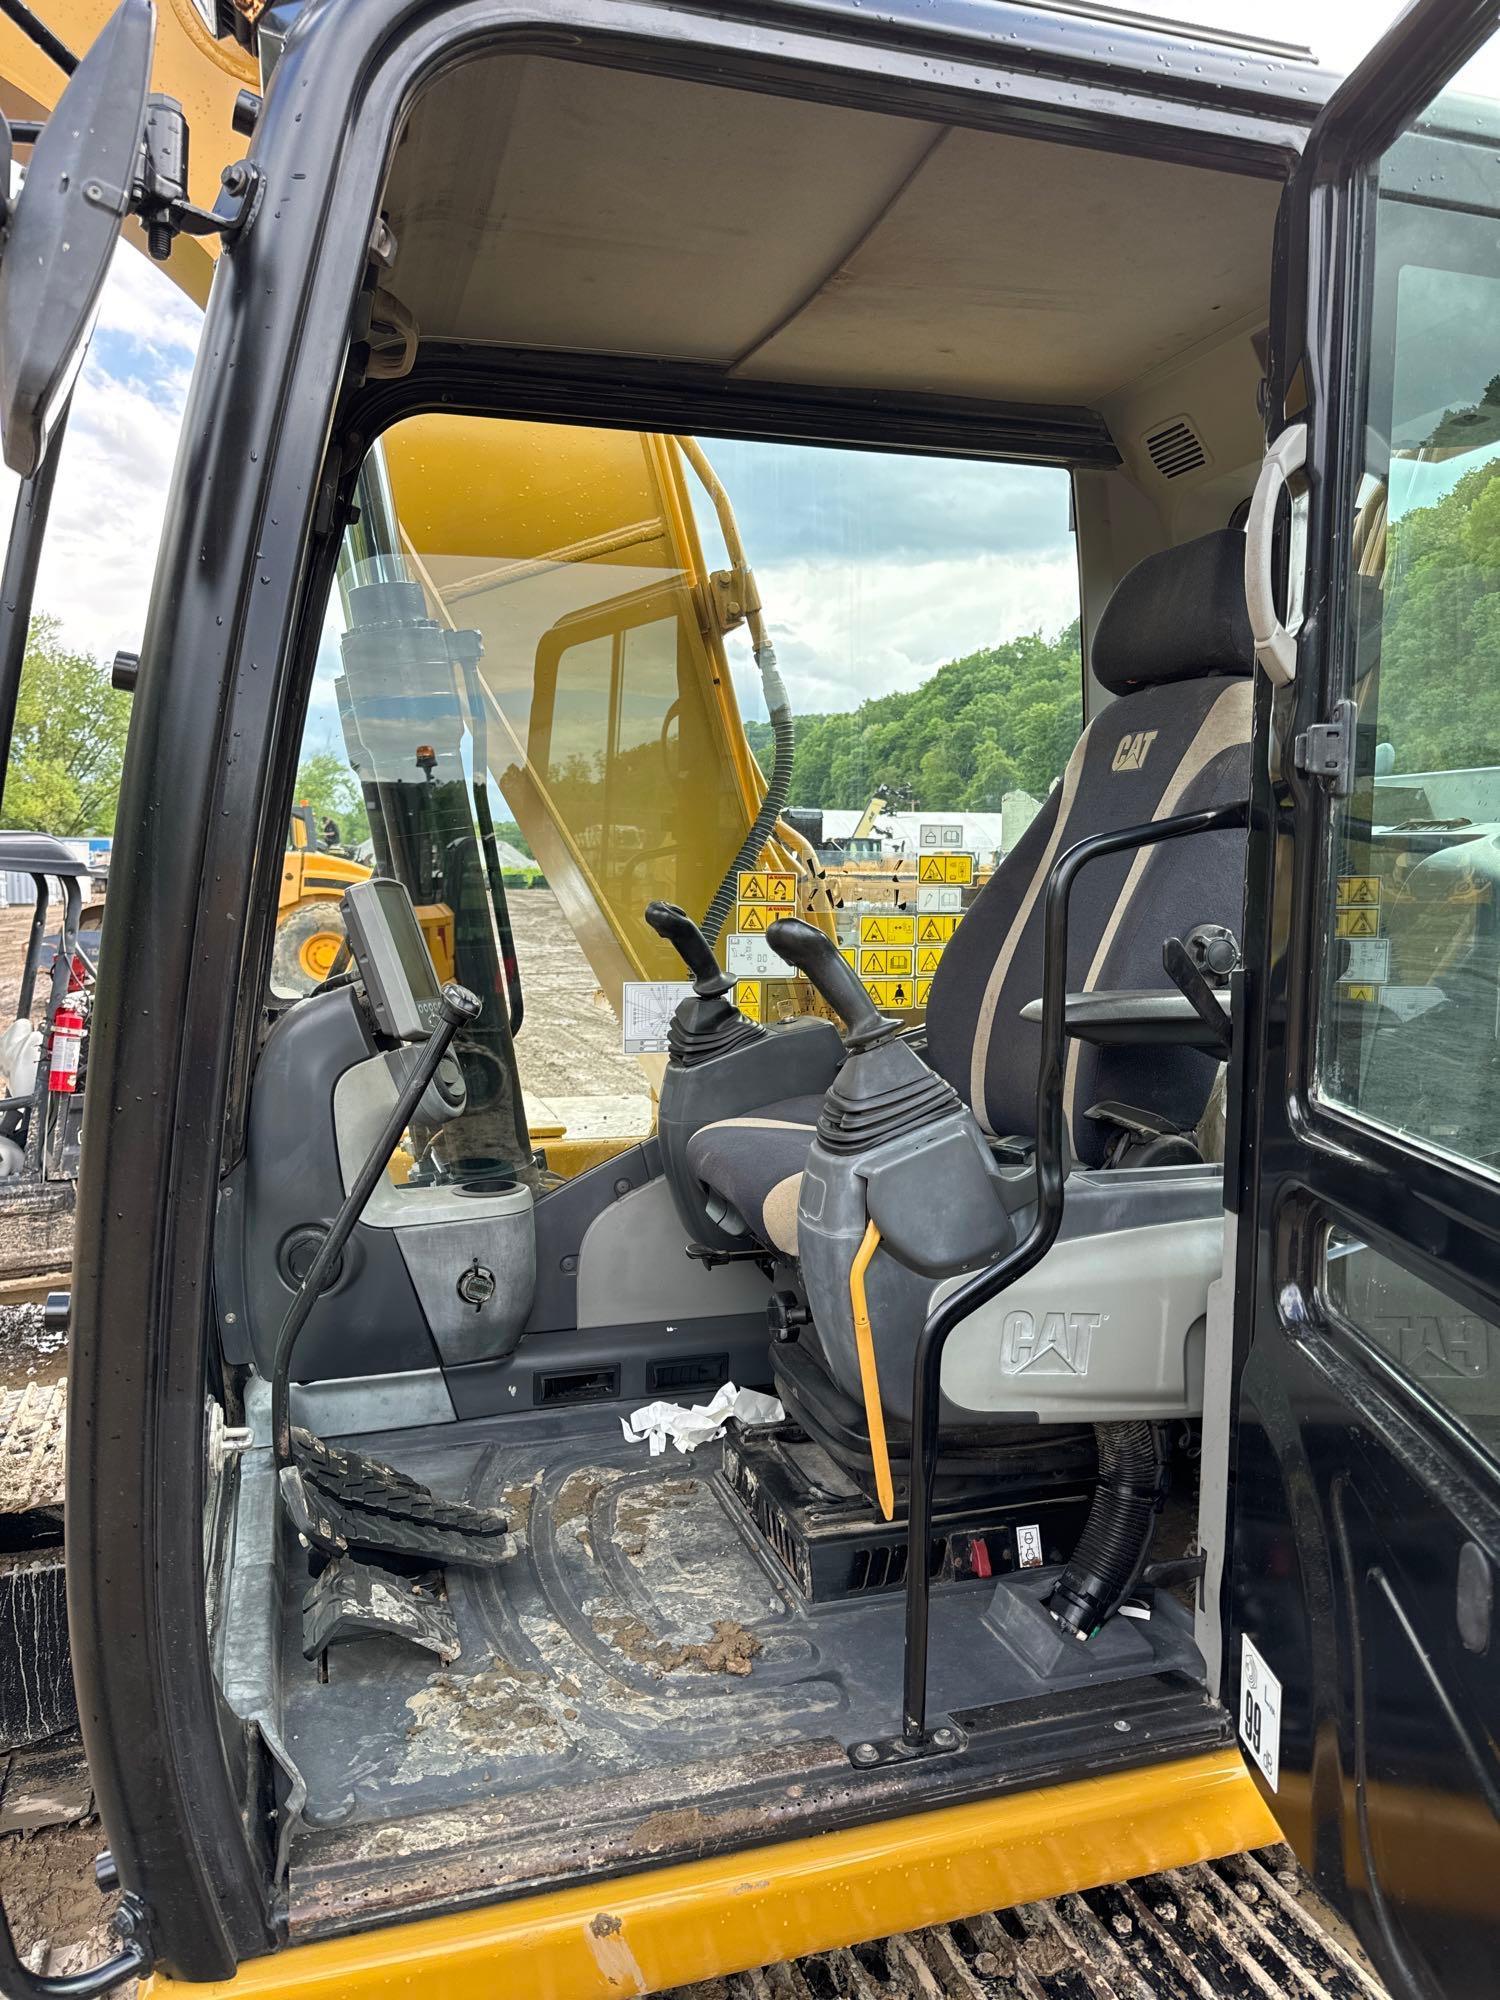 2020 CAT 313FLGC HYDRAULIC EXCAVATOR SN:GJD10368 powered by Cat diesel engine, equipped with Cab,